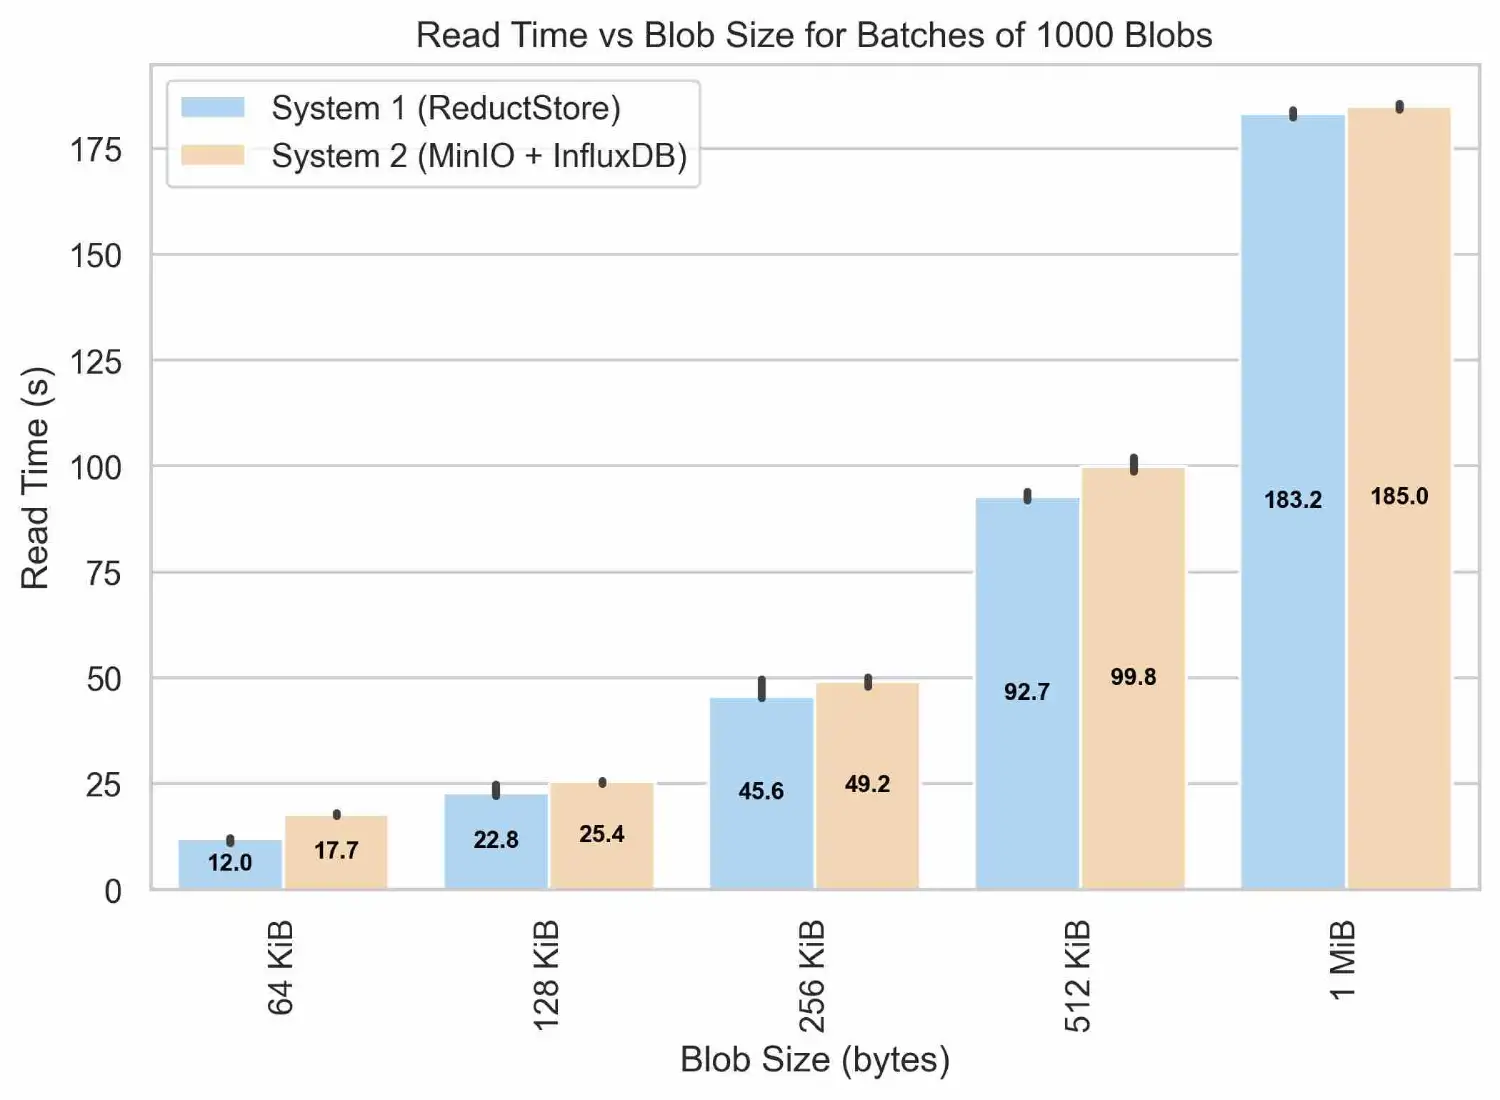 Read Time vs Blob Size for Batches of 1000 Blobs above 32 KiB